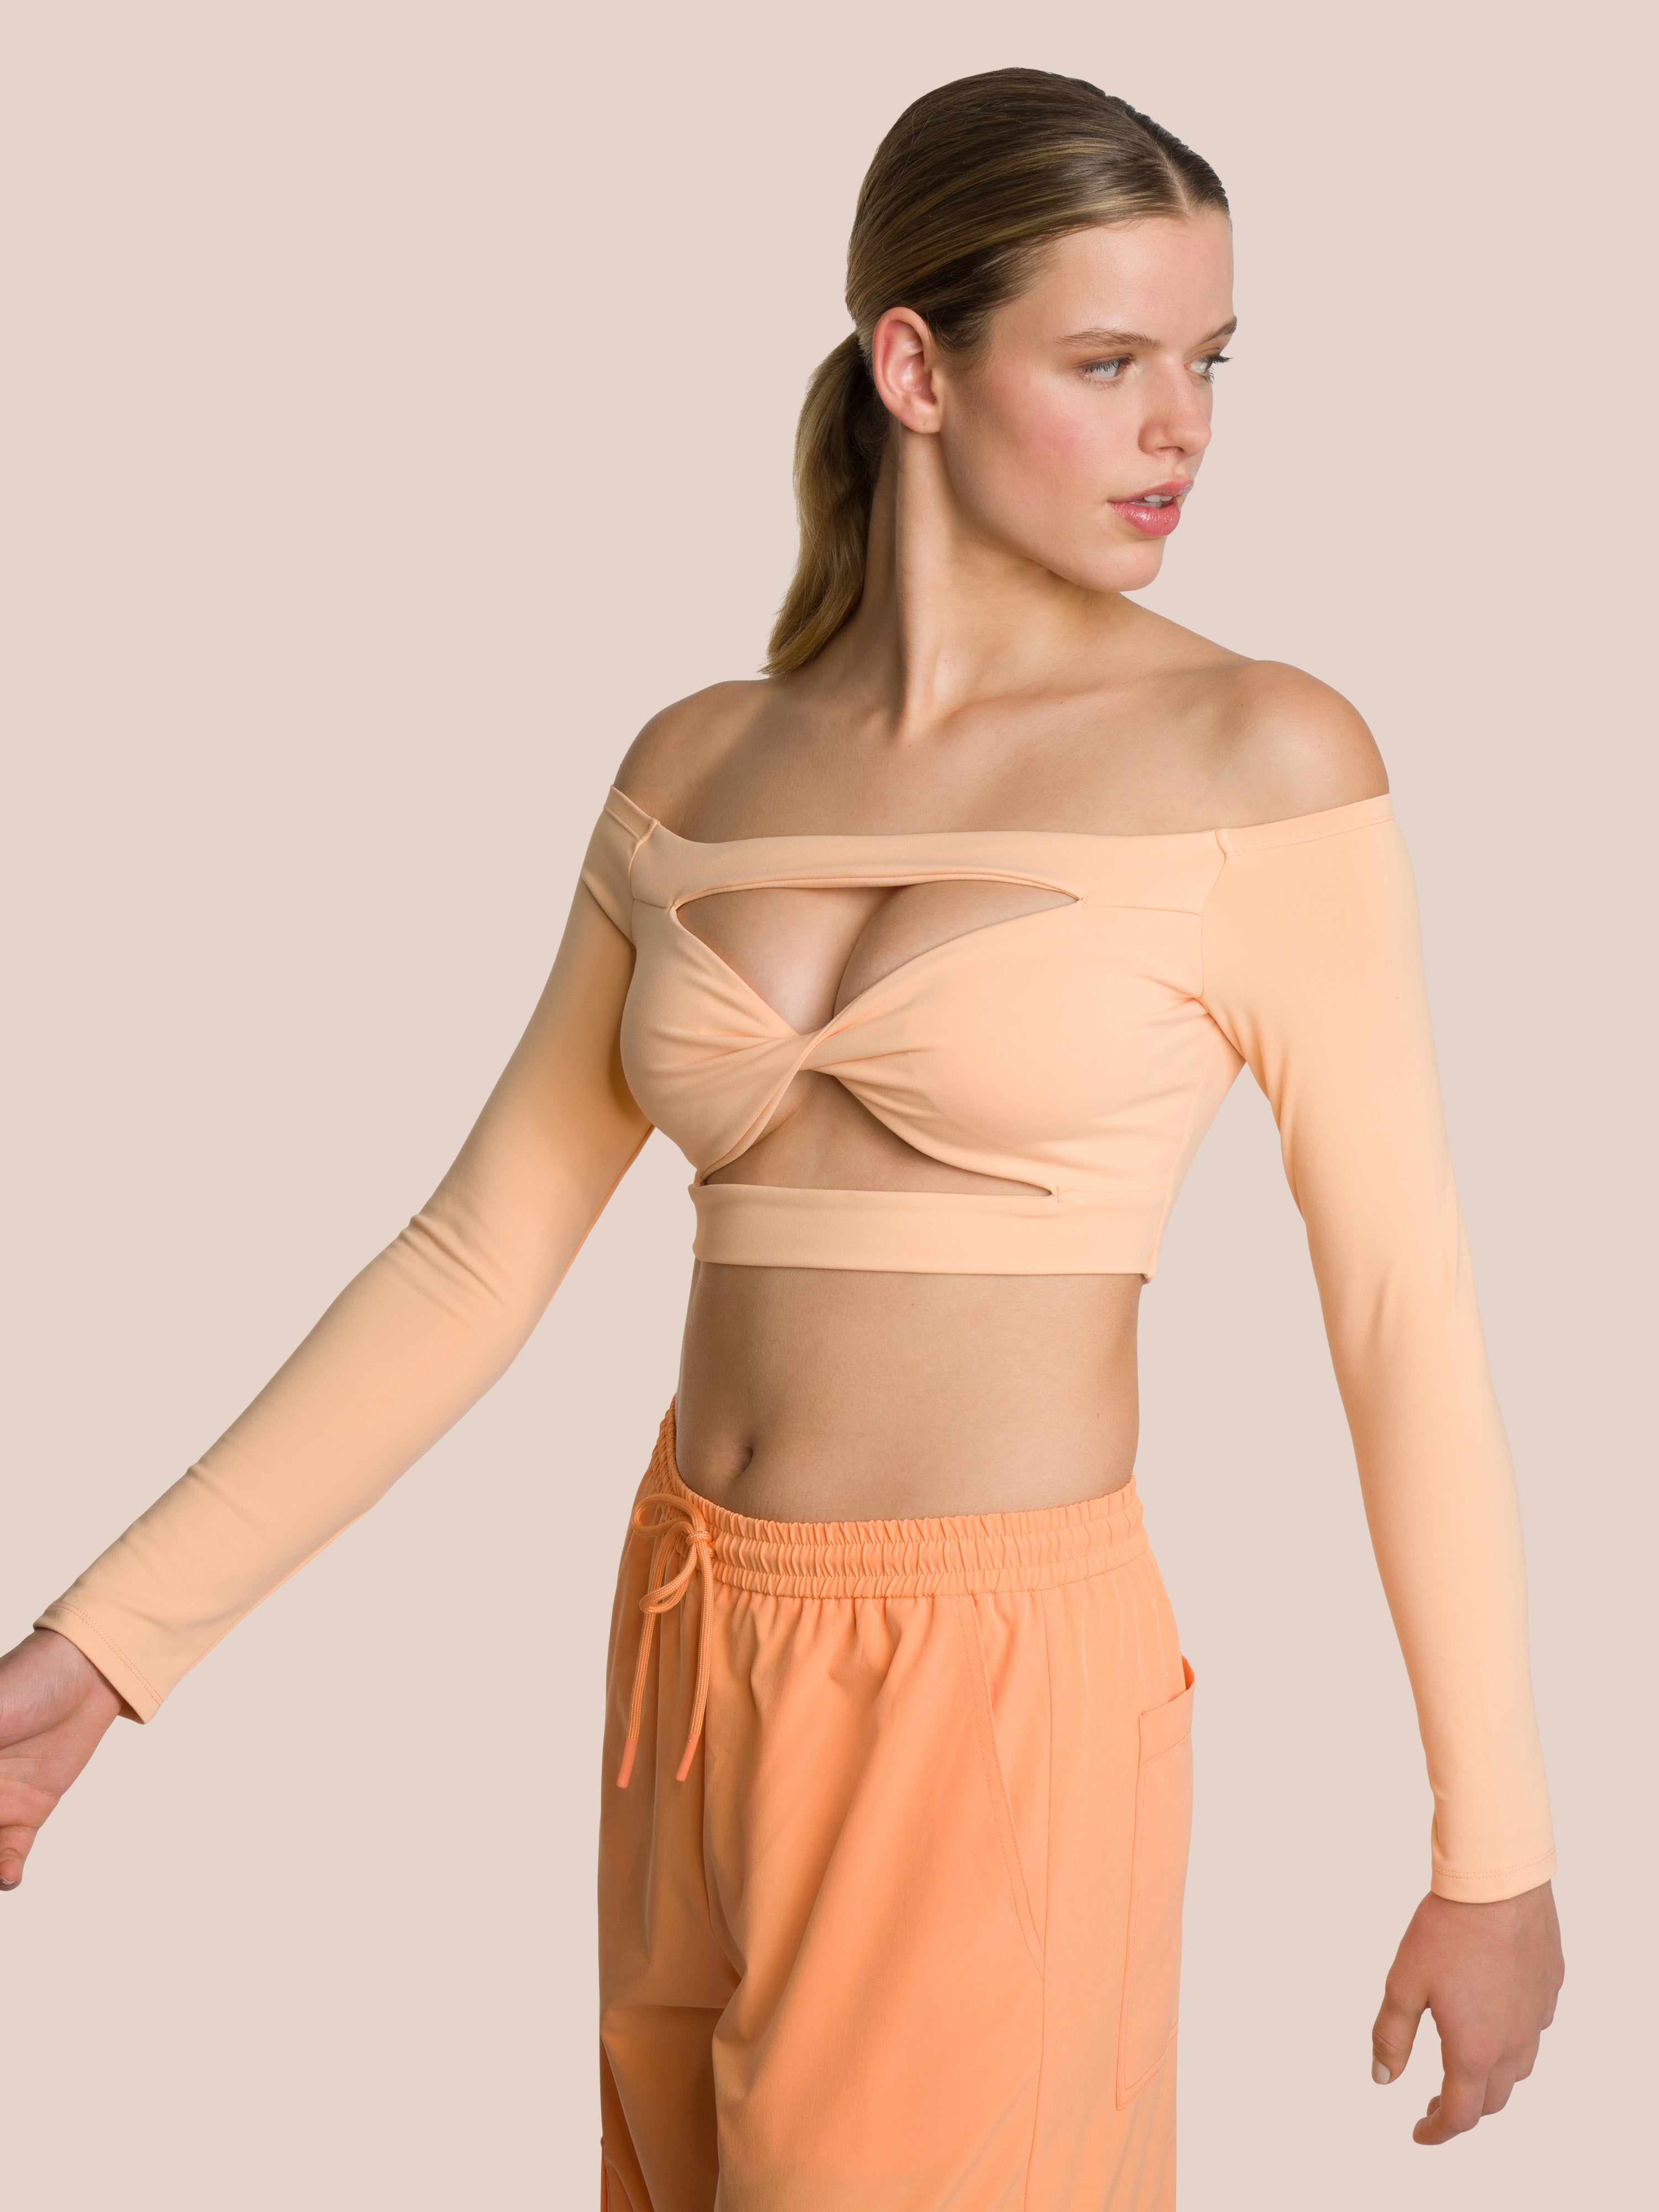 Three-Piece Cut Out Shirt Set Deluxe - Soft Tropical Orange